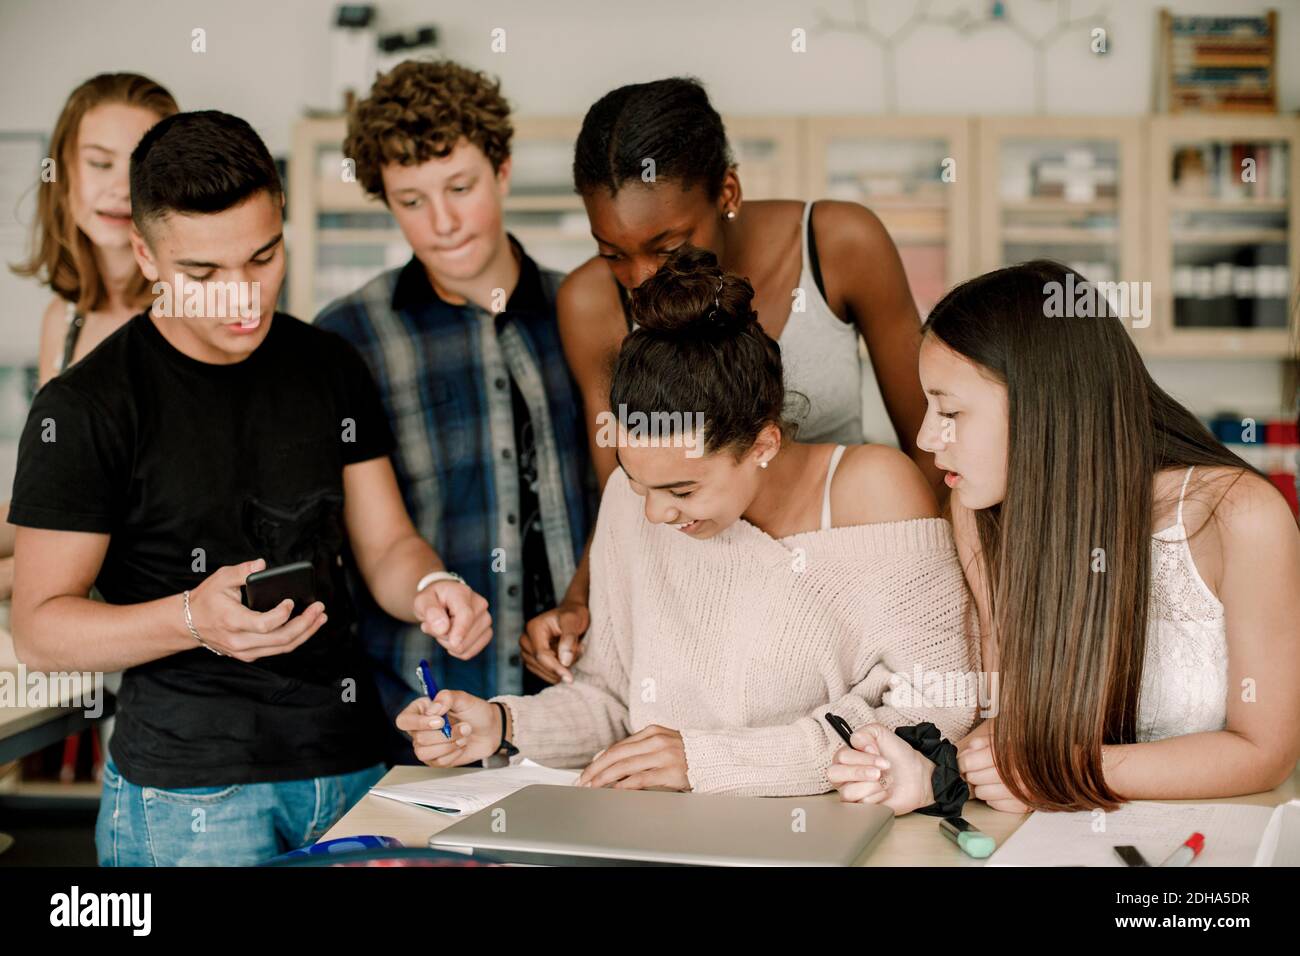 Smiling teenager studying while friends standing by table in classroom Stock Photo